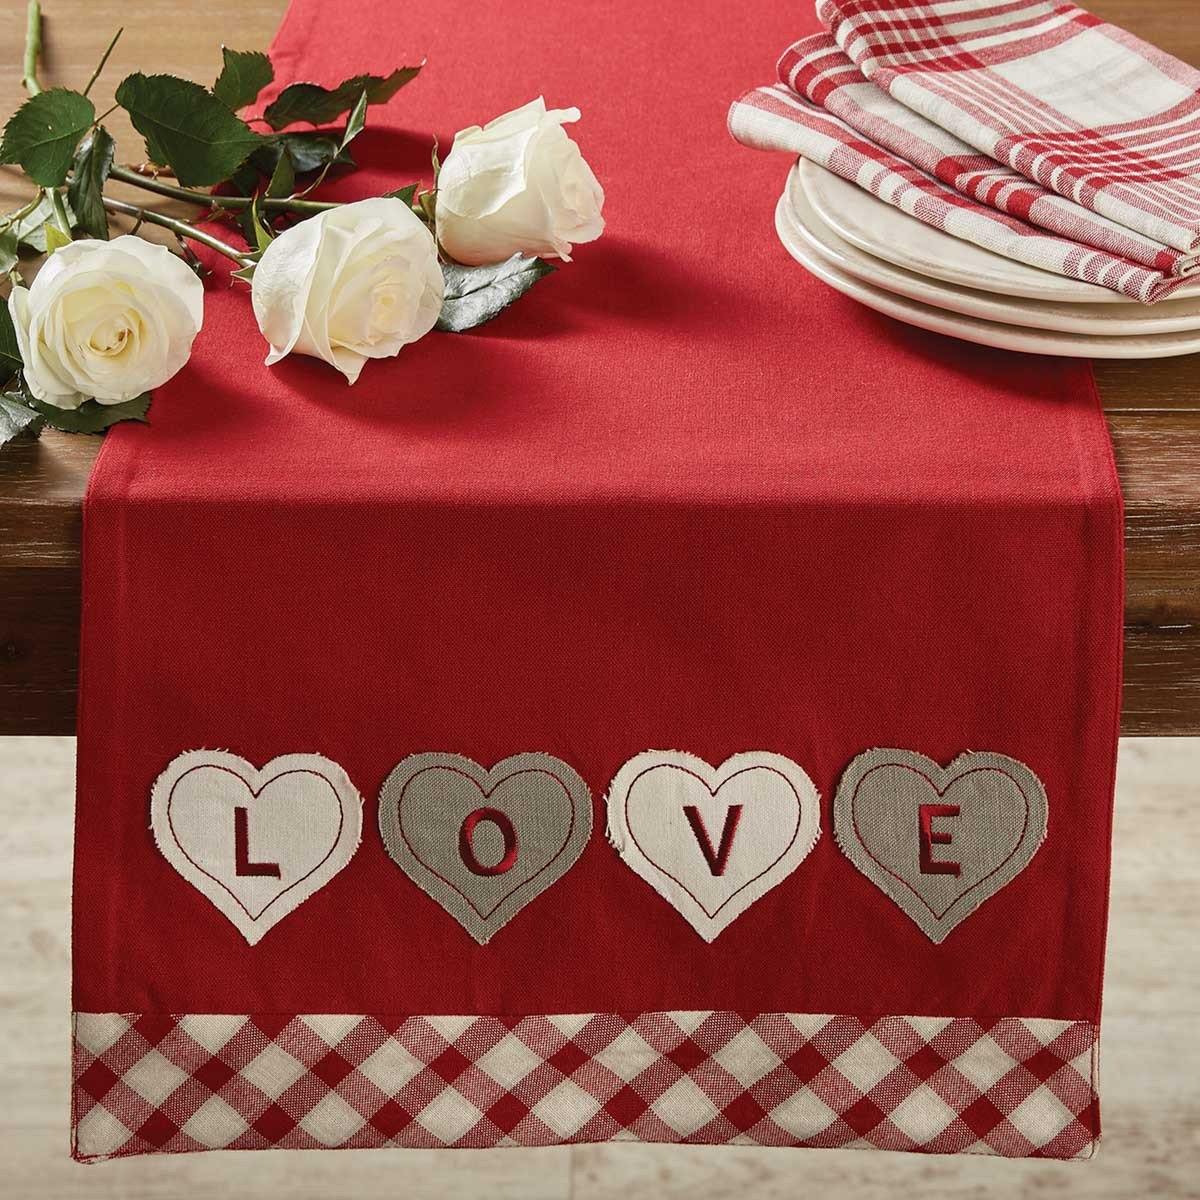 Love with Hearts Applique Table Runner - 42" L Park Designs - The Fox Decor